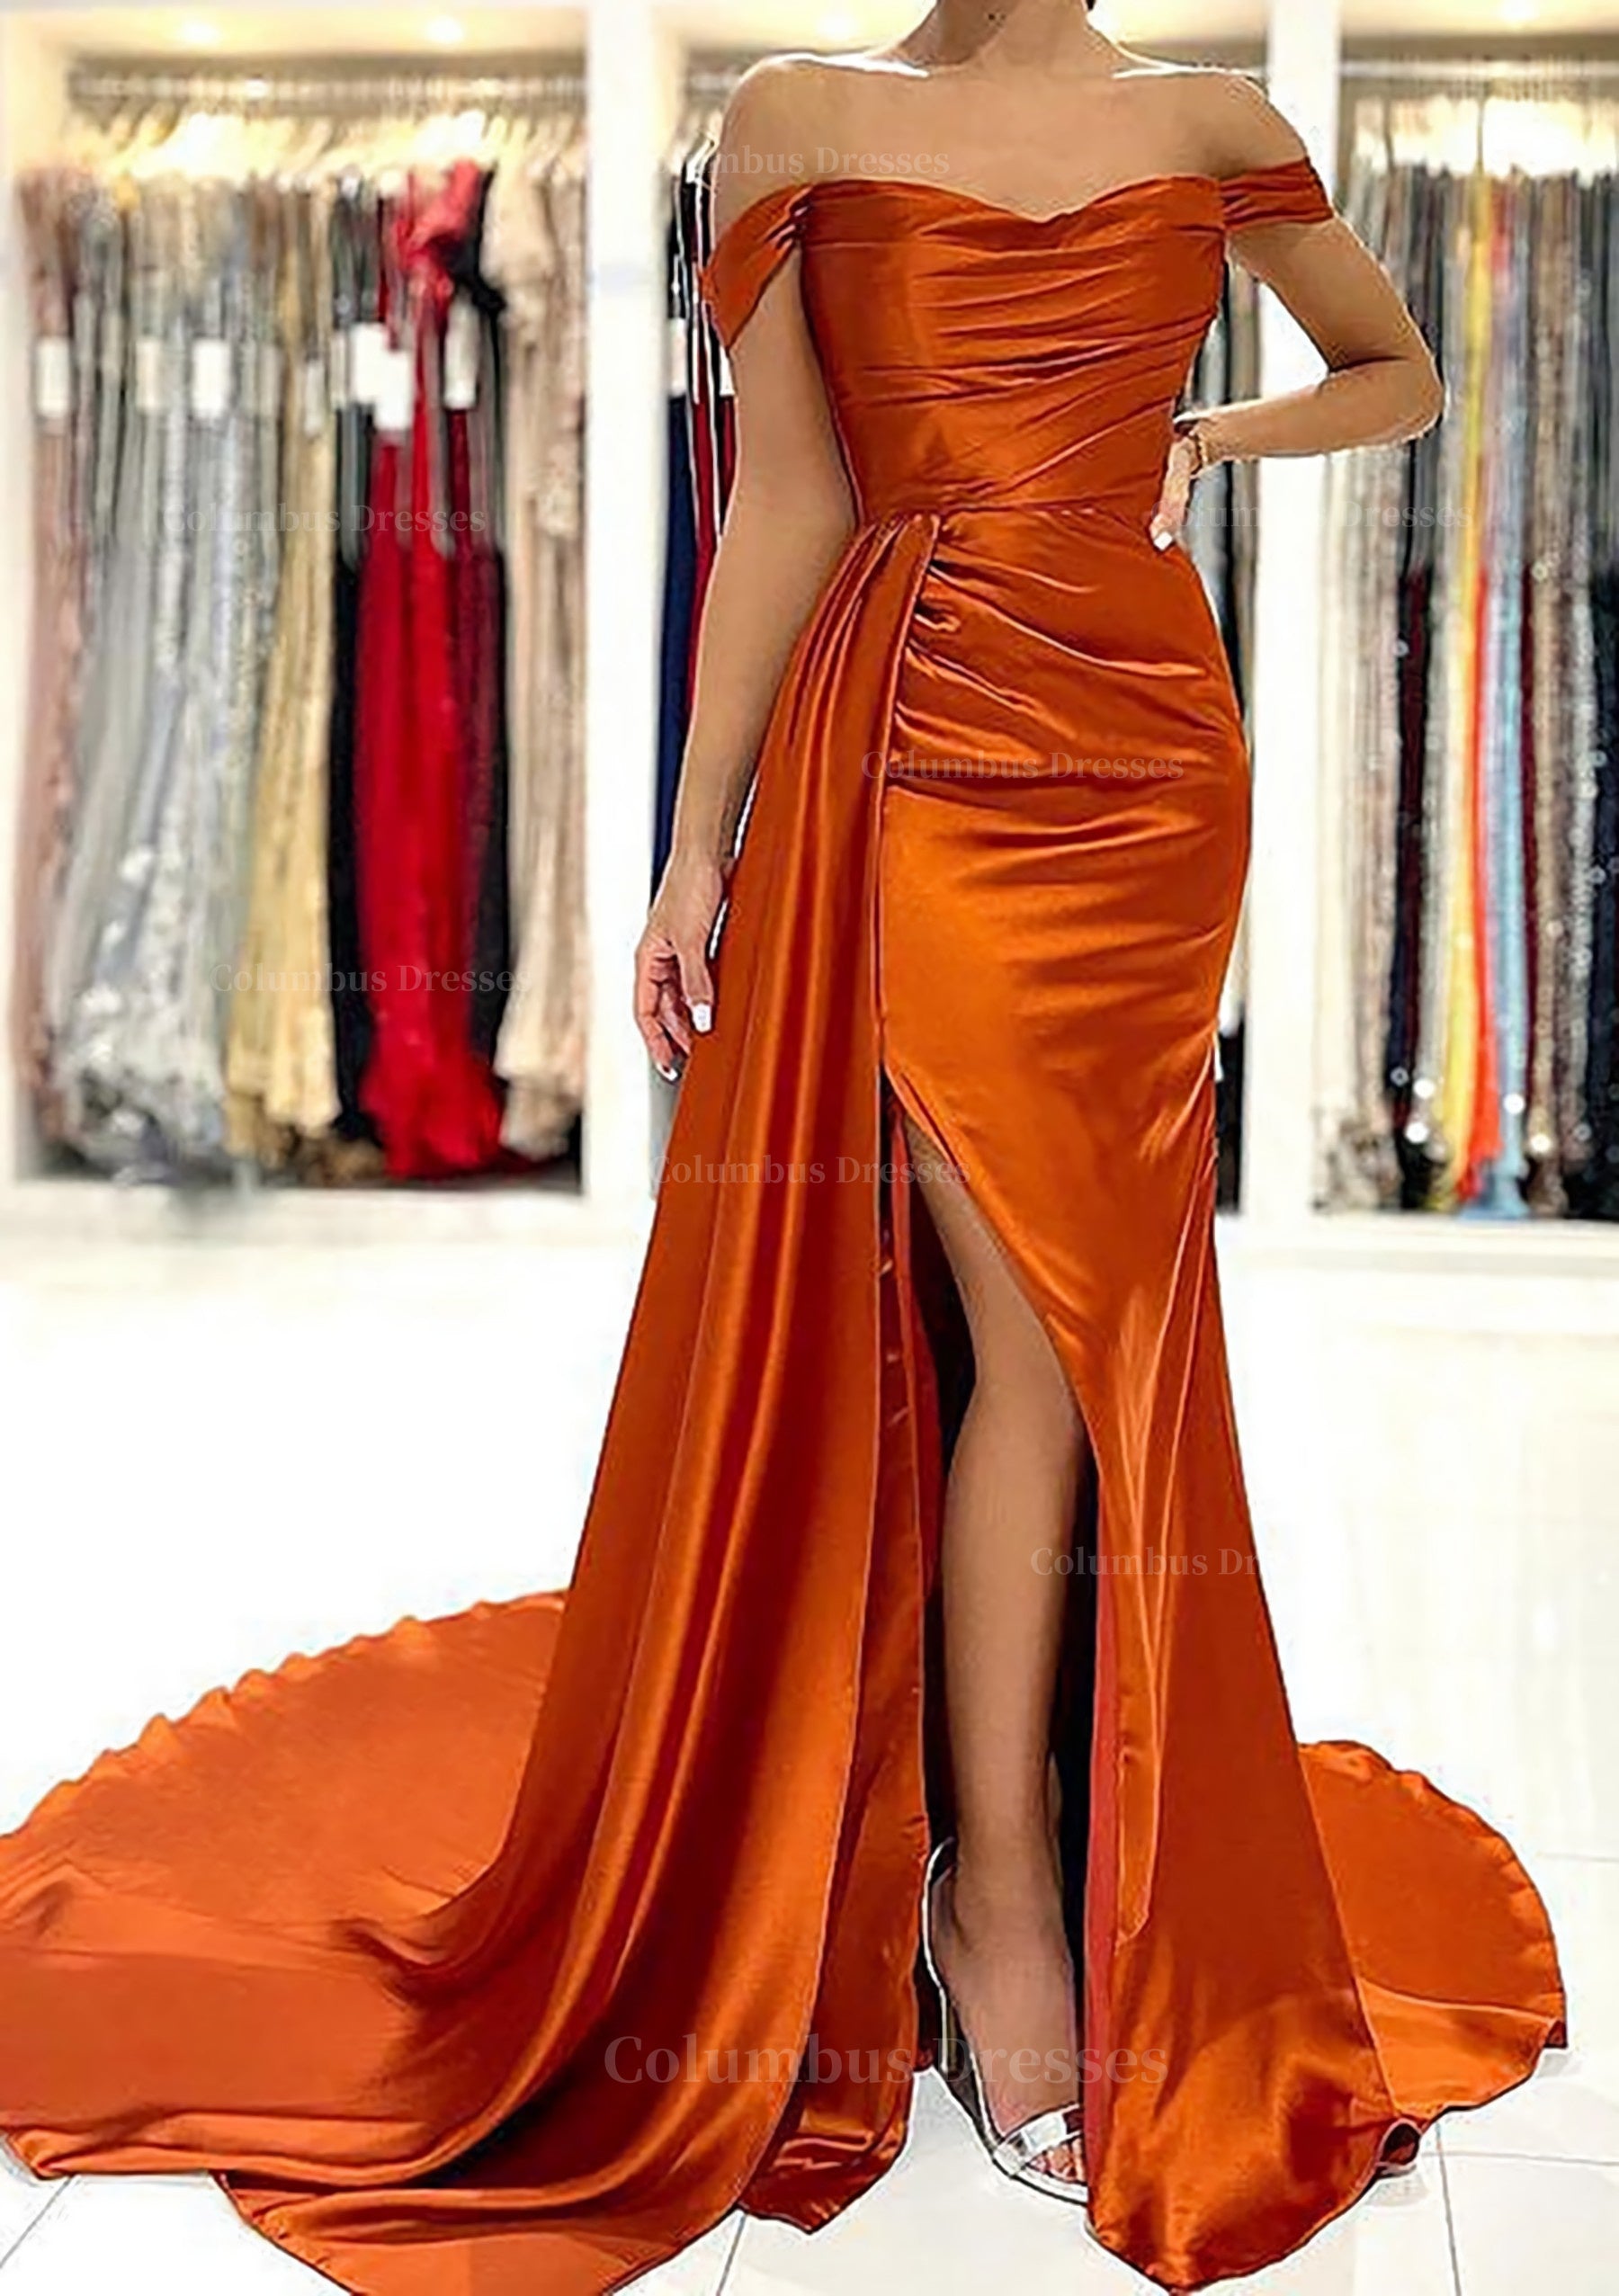 Party Dress Express Photos, Sheath/Column Off-the-Shoulder Short Sleeve Charmeuse Court Train Prom Dress With Pleated